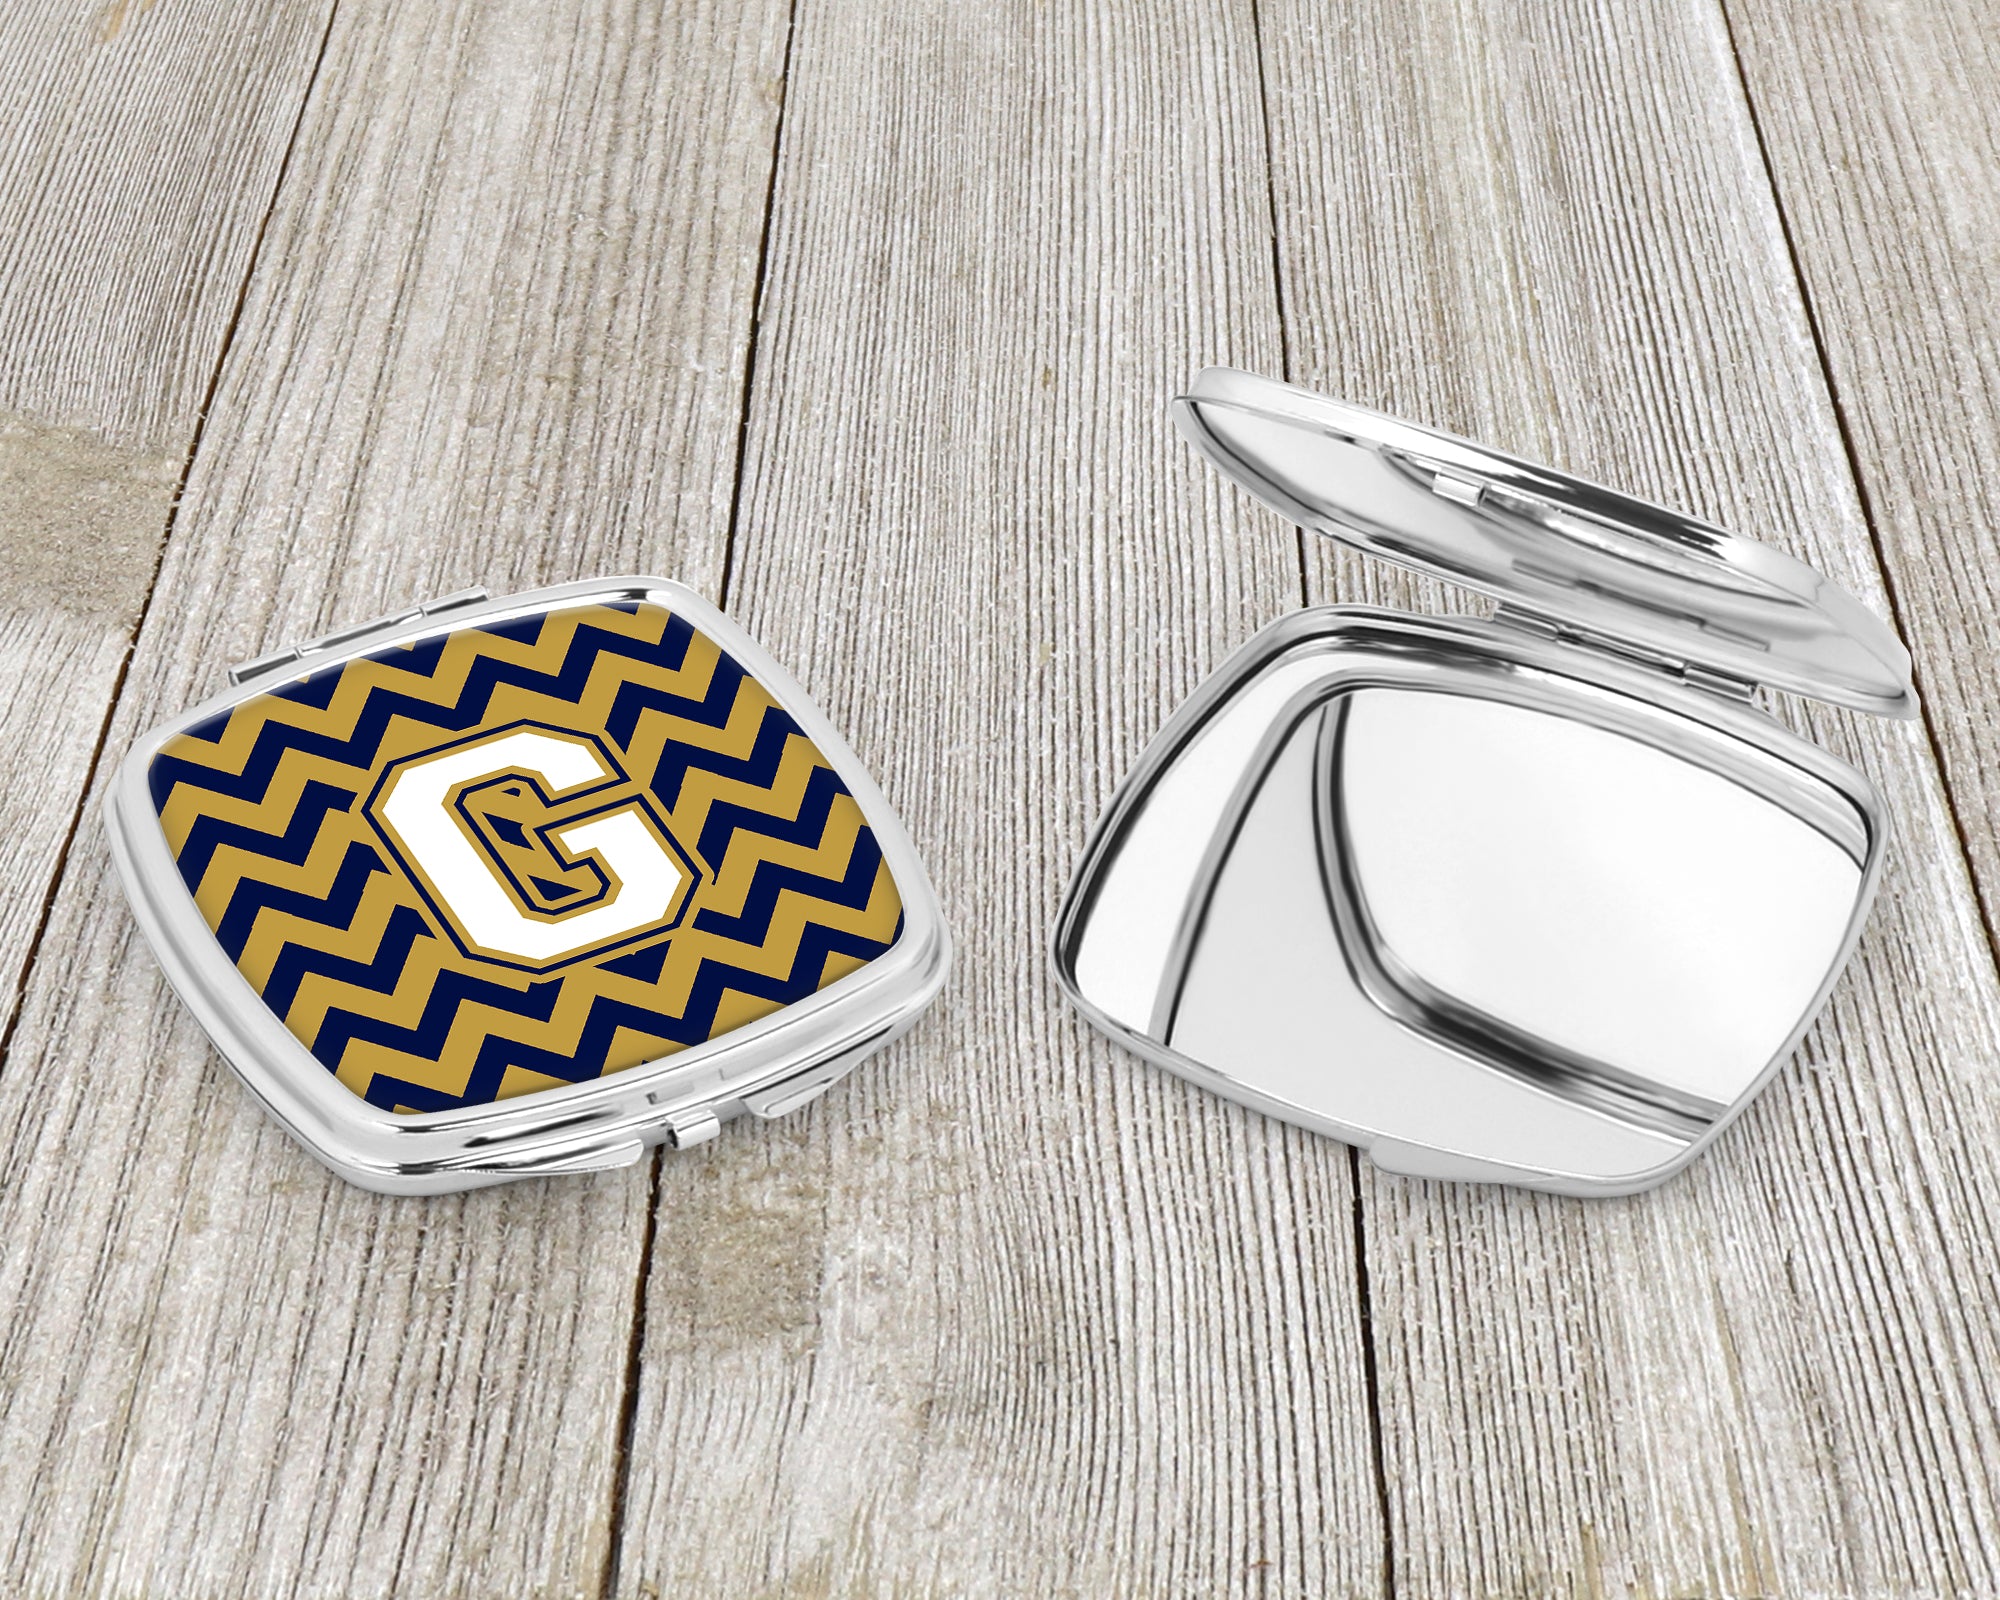 Letter G Chevron Navy Blue and Gold Compact Mirror CJ1057-GSCM  the-store.com.